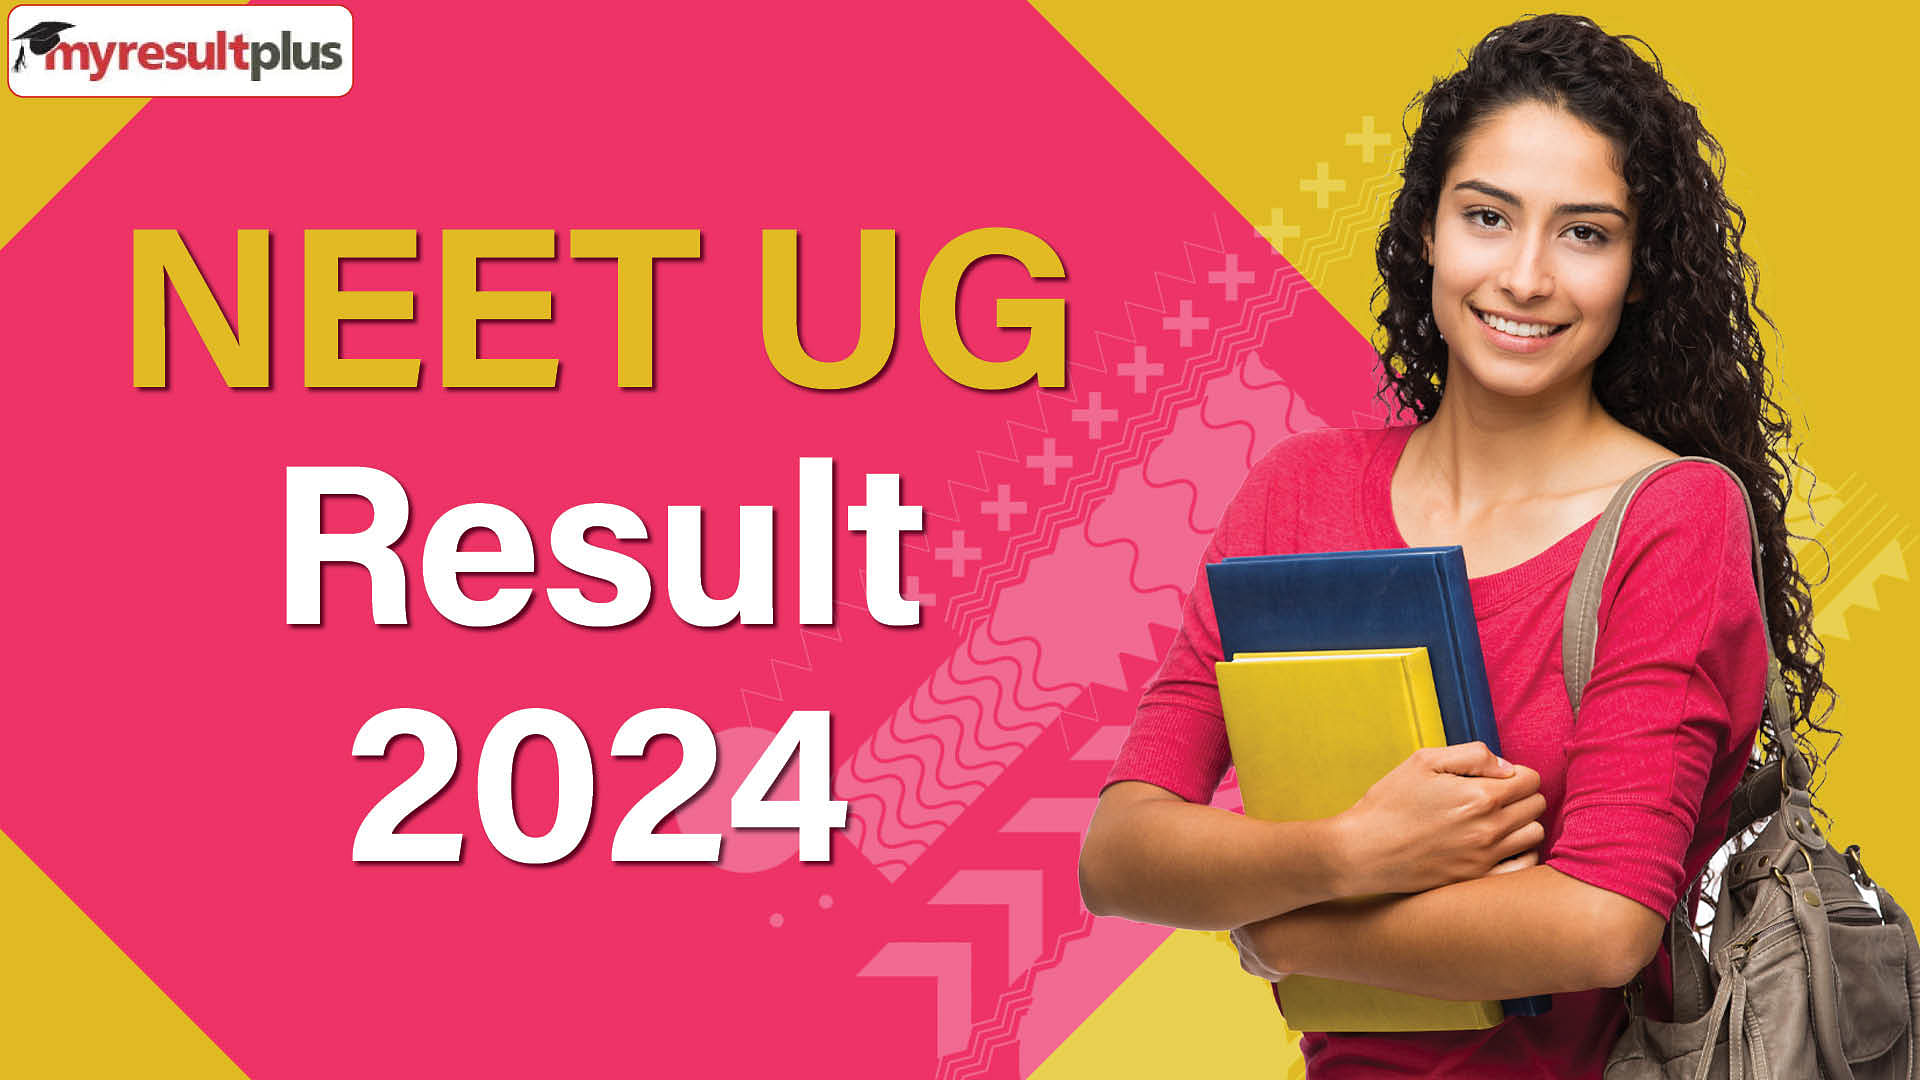 NEET Revised Result 2024 and final answer key out now, Read more details here